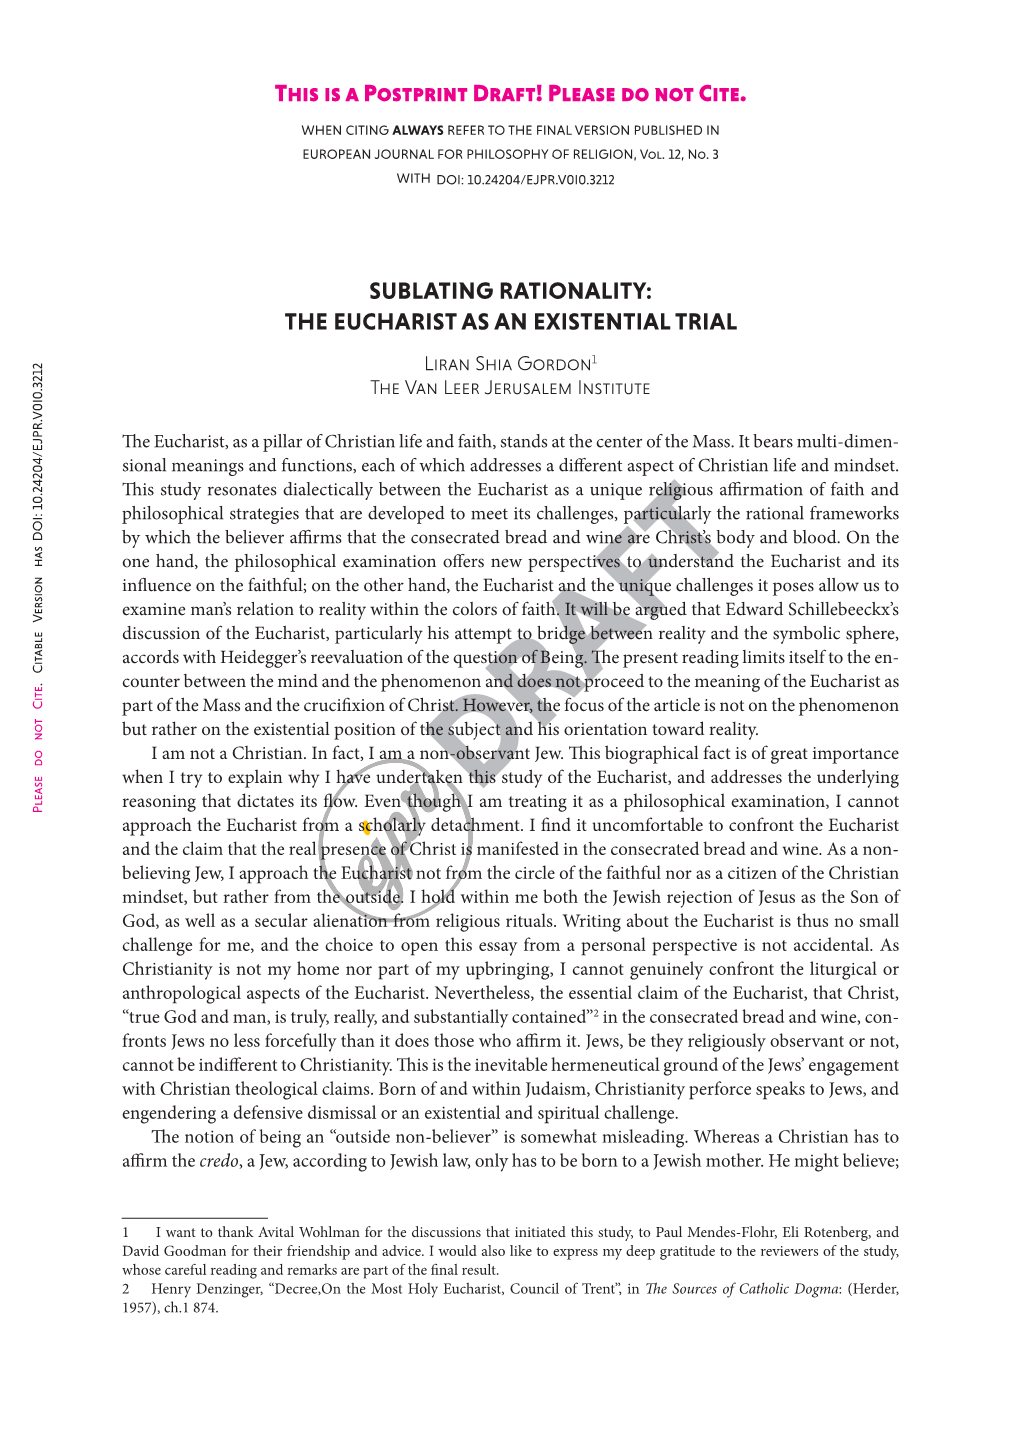 This Is a Postprint Draft! Please Do Not Cite. SUBLATING RATIONALITY